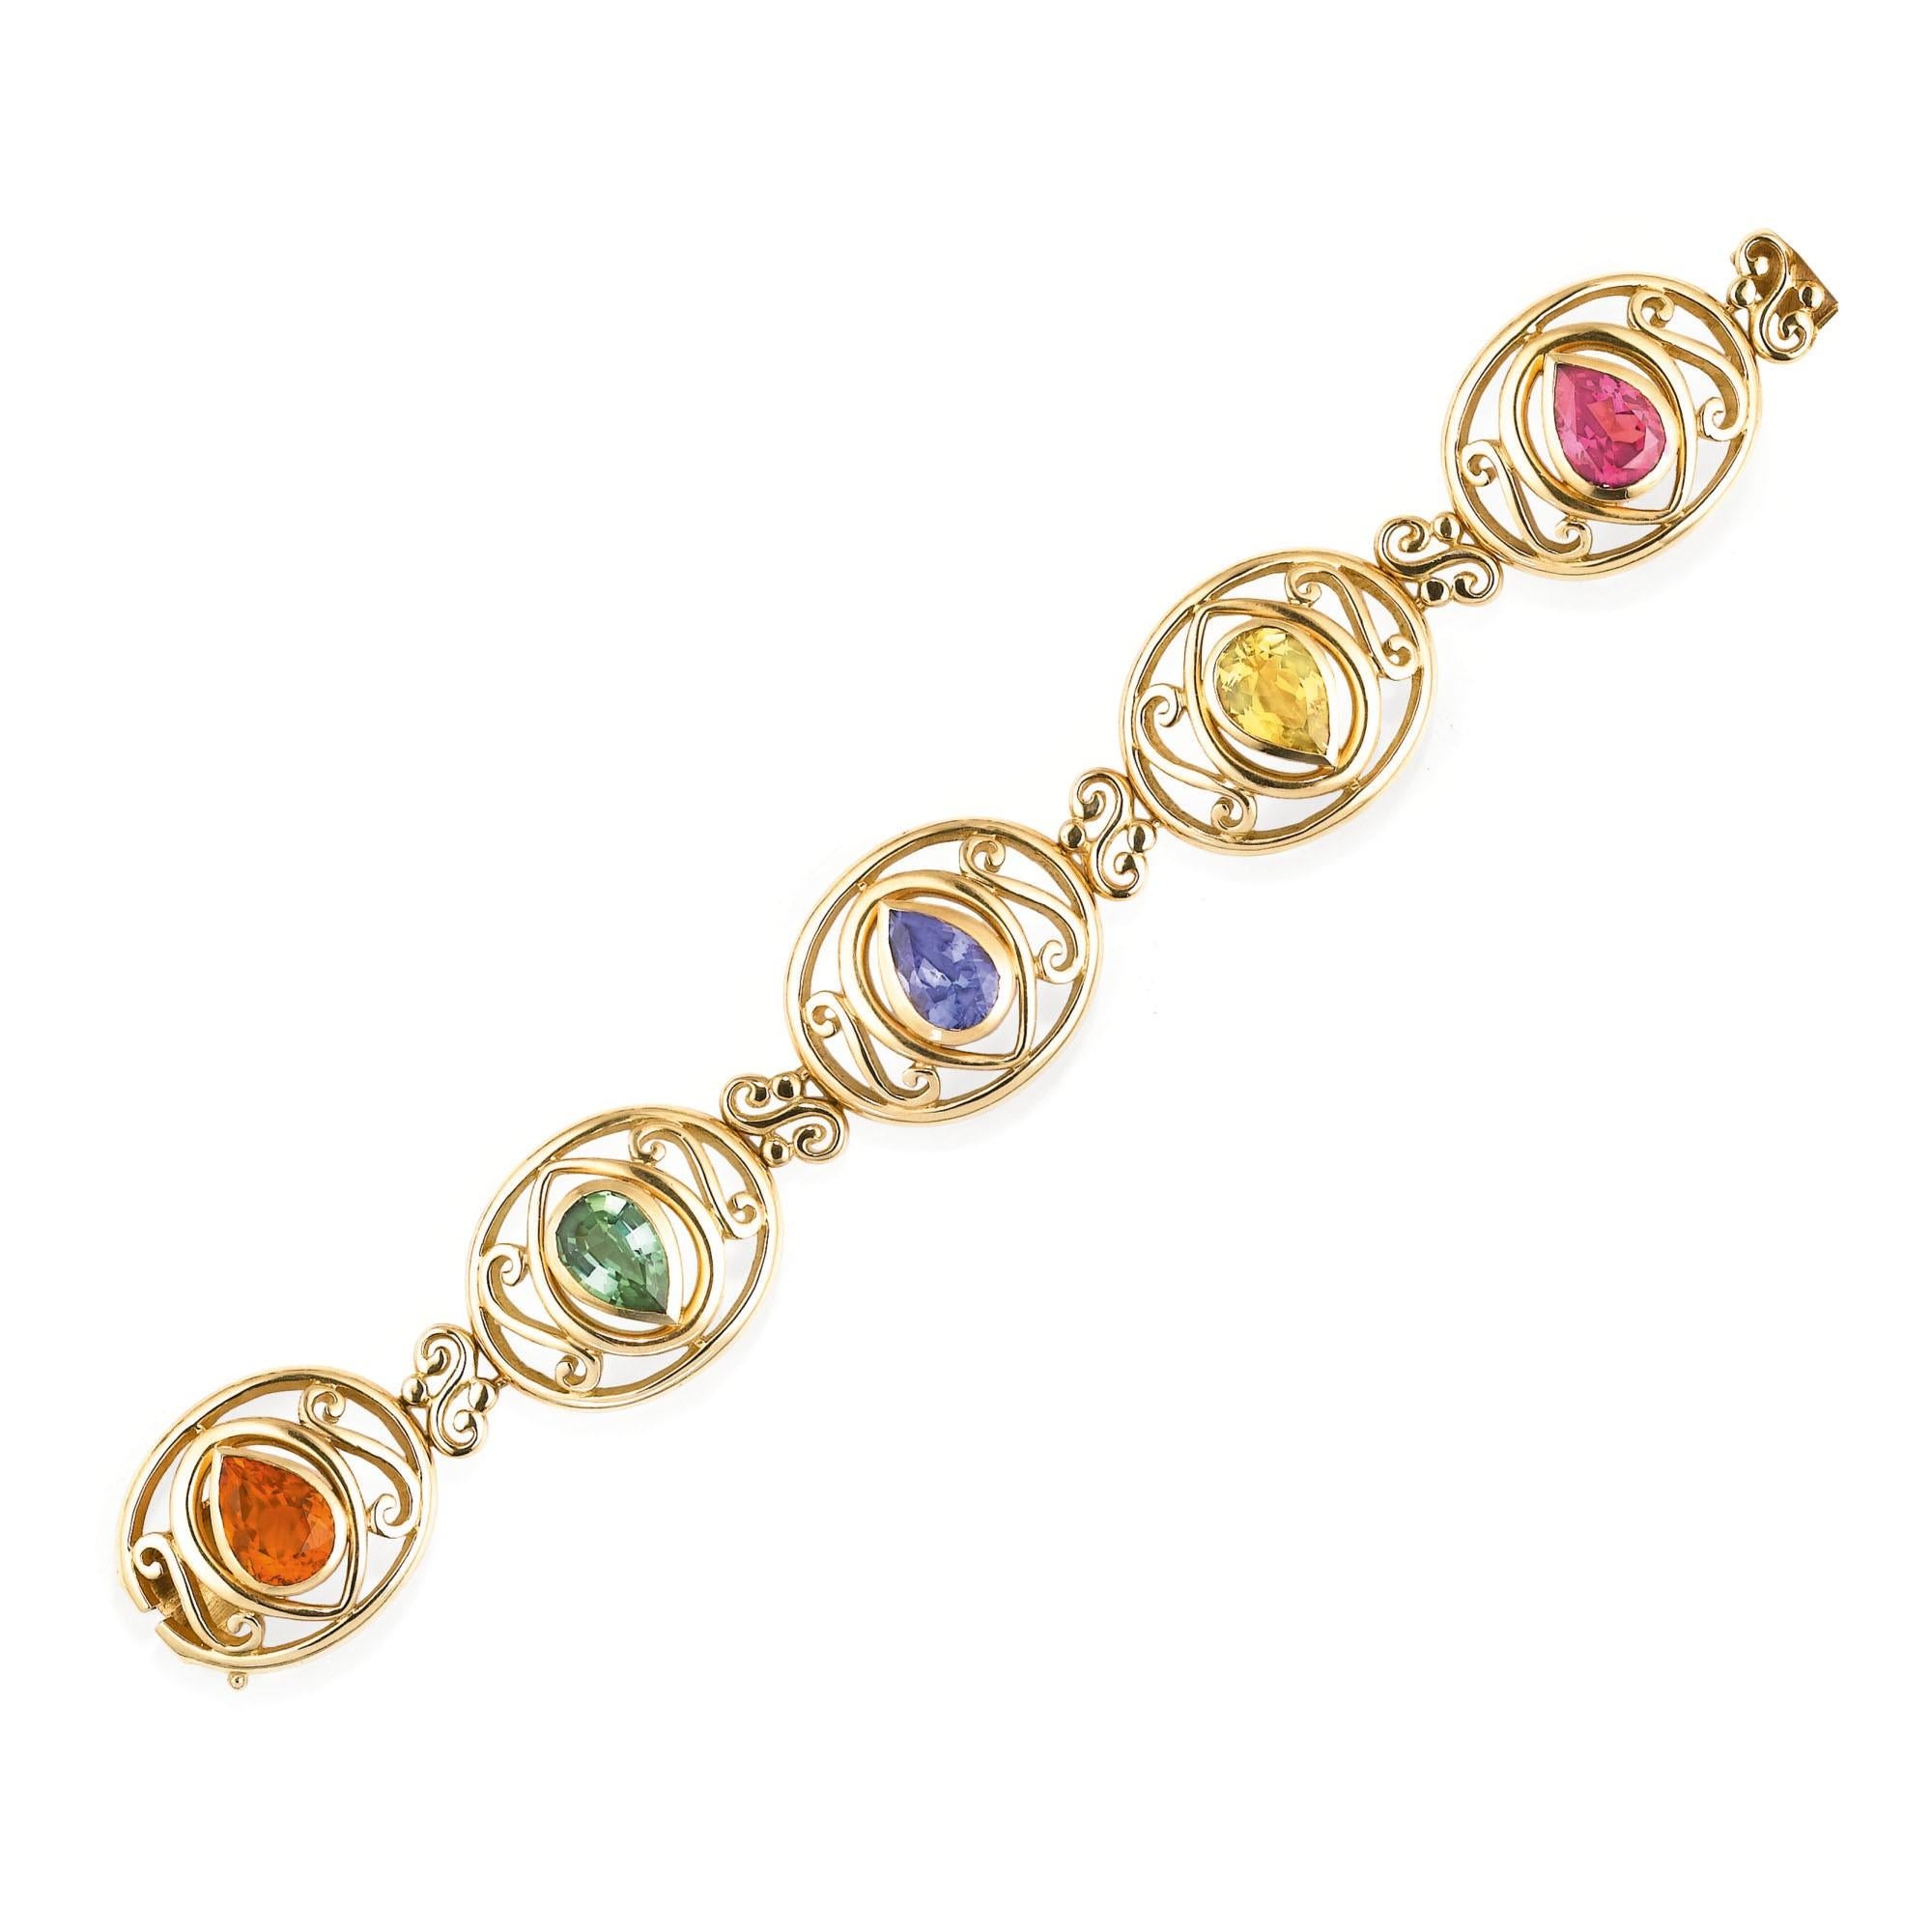 A stylish link bracelet by Mellerio composed of five oval openwork links collet-set with a pear-shaped citrine, a green tourmaline, a tanzanite, a yellow beryl and a rhodolite. 18 karat gold, made in France. Length approximately 170mm.